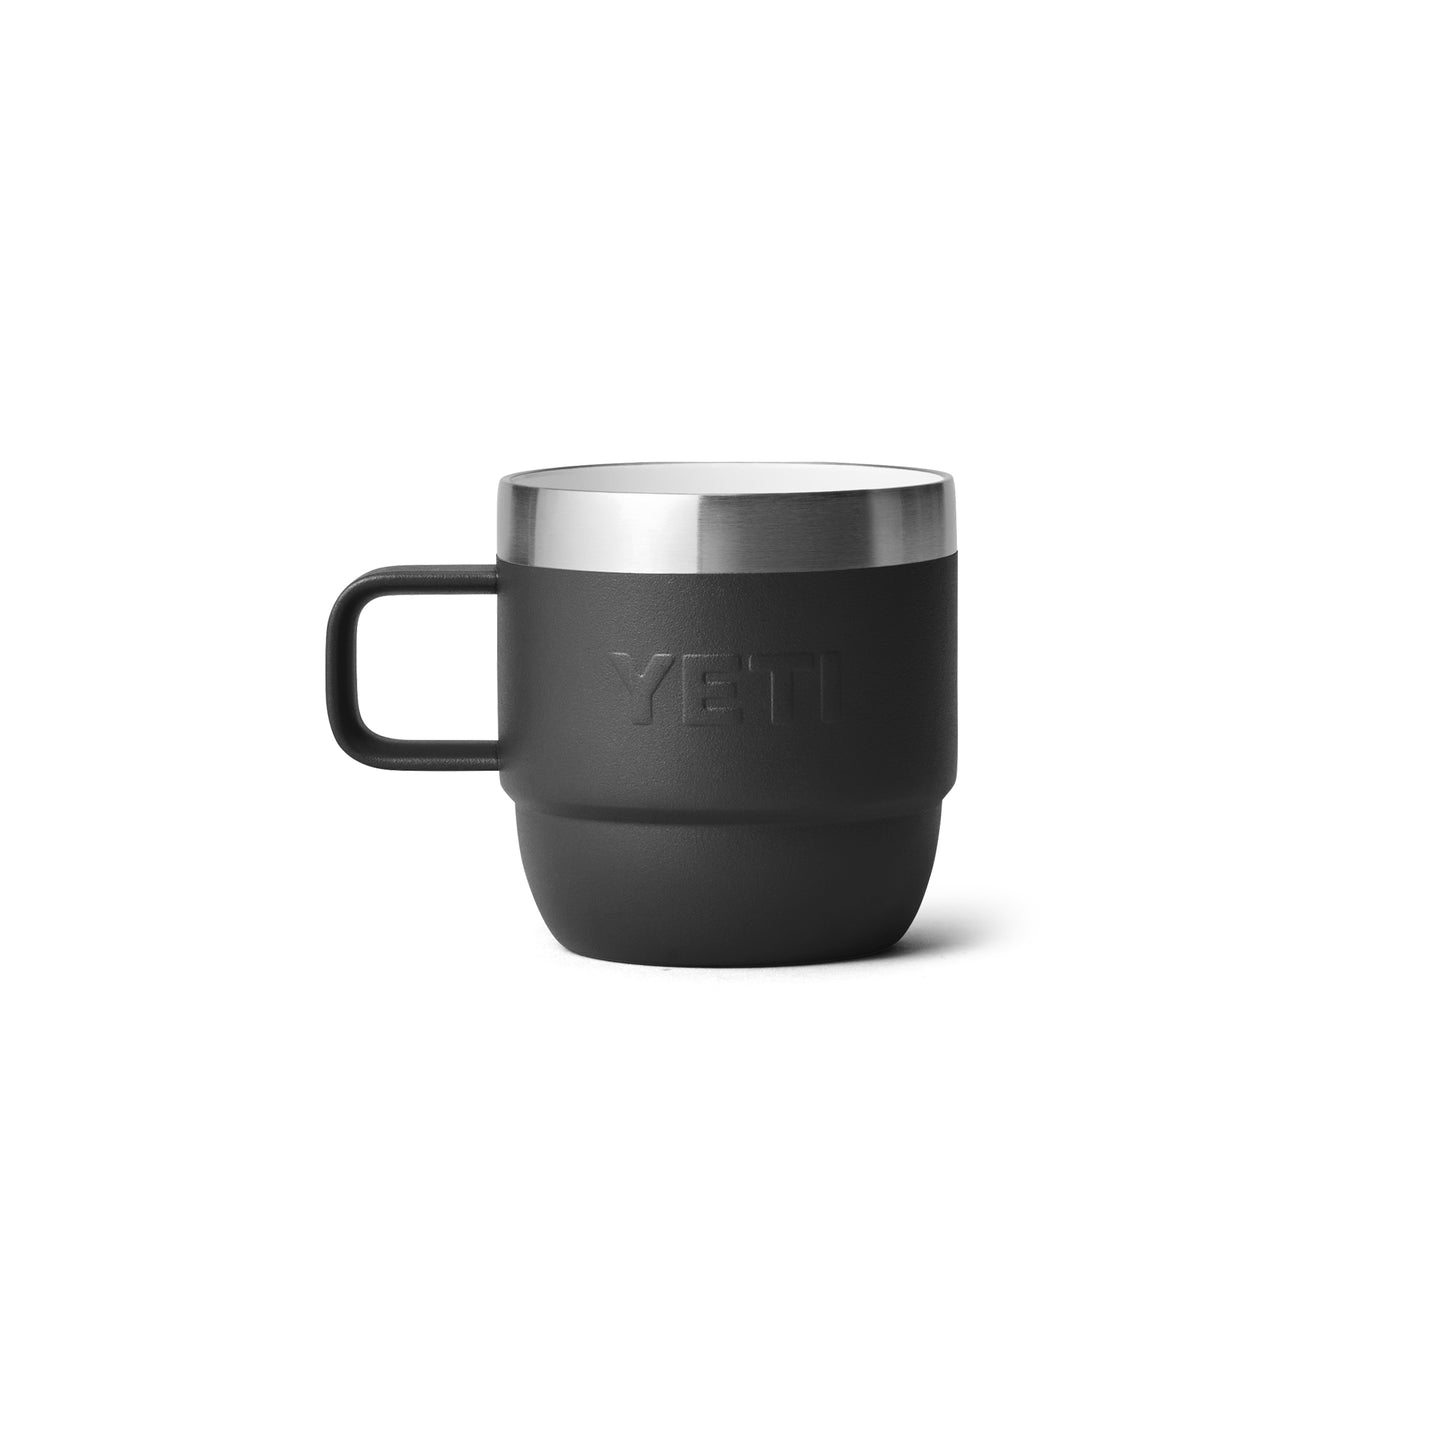 YETI Rambler 6oz Stackable Cups (2 Pack)